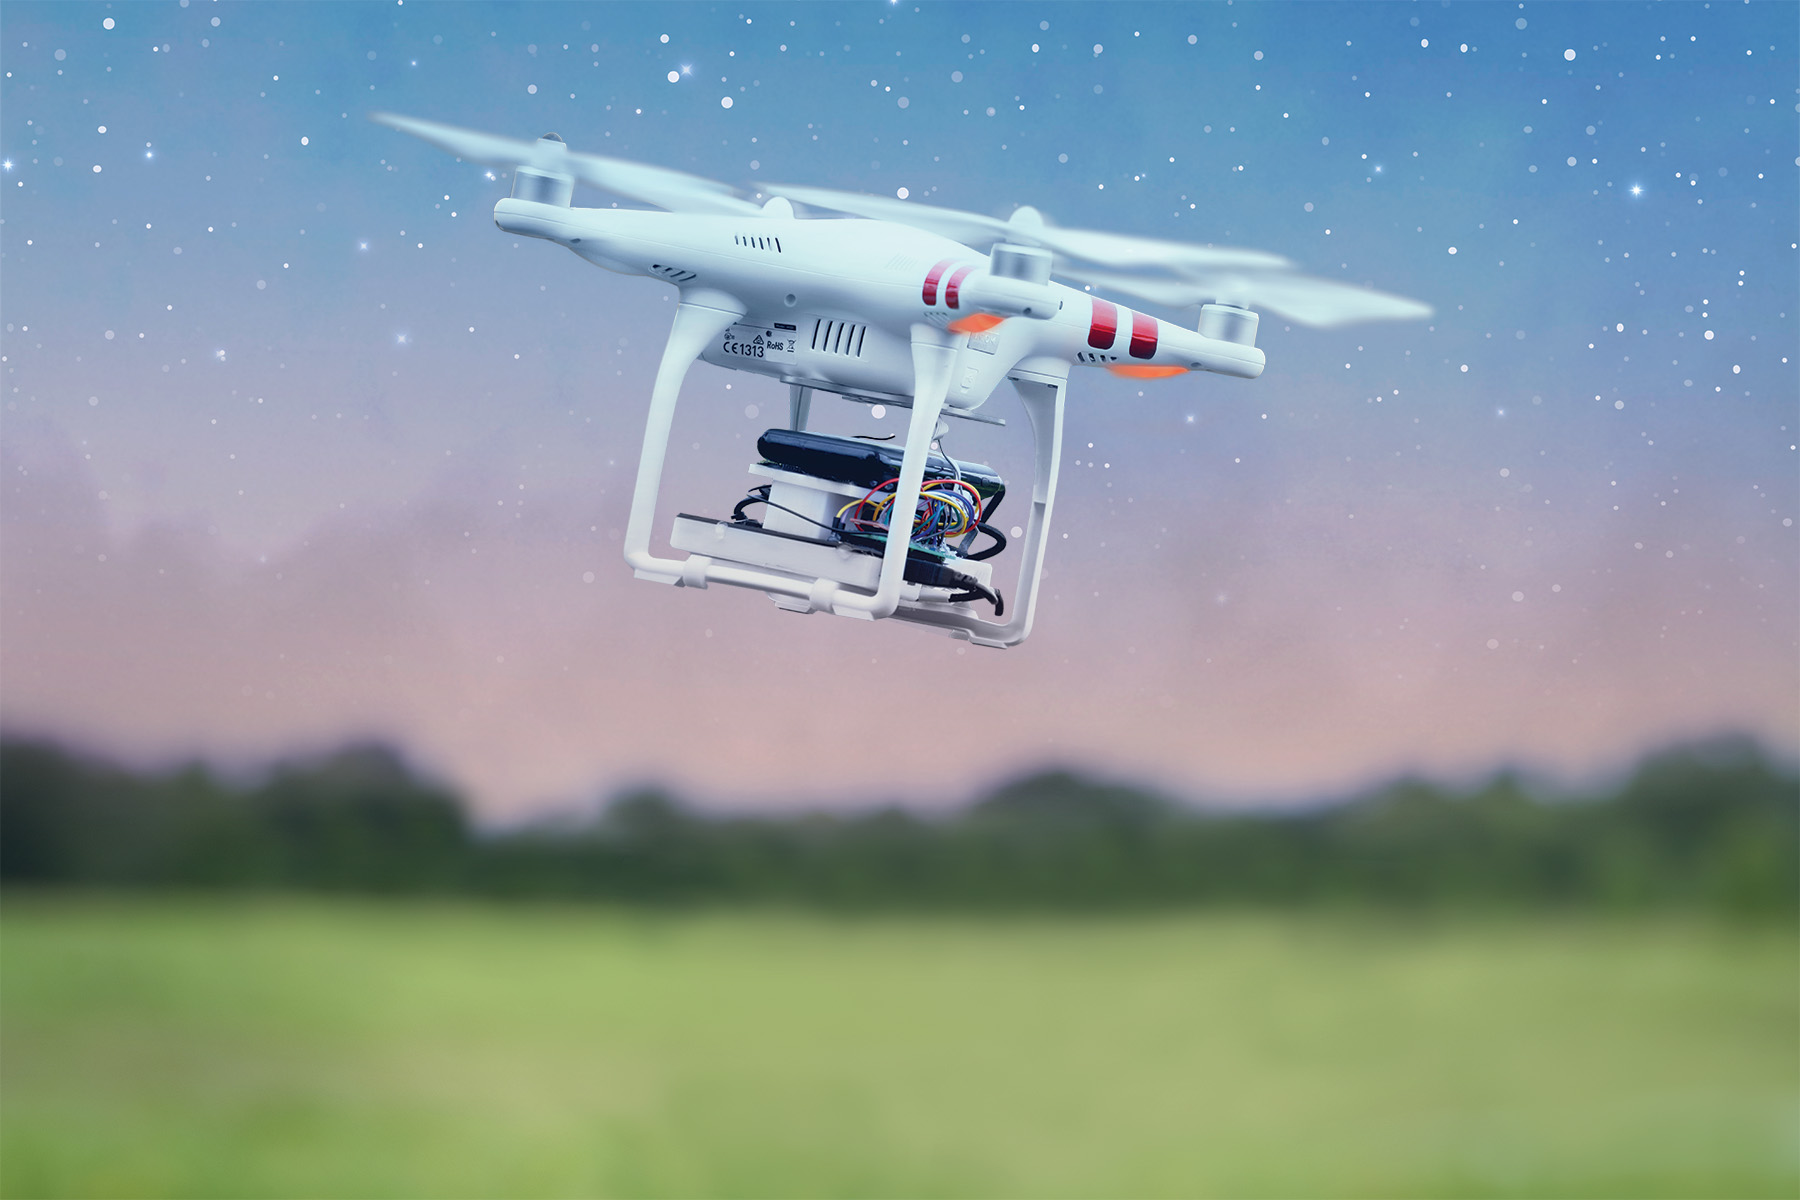 a drone flying amid a star-filled sky in a grassy and wooded landscape